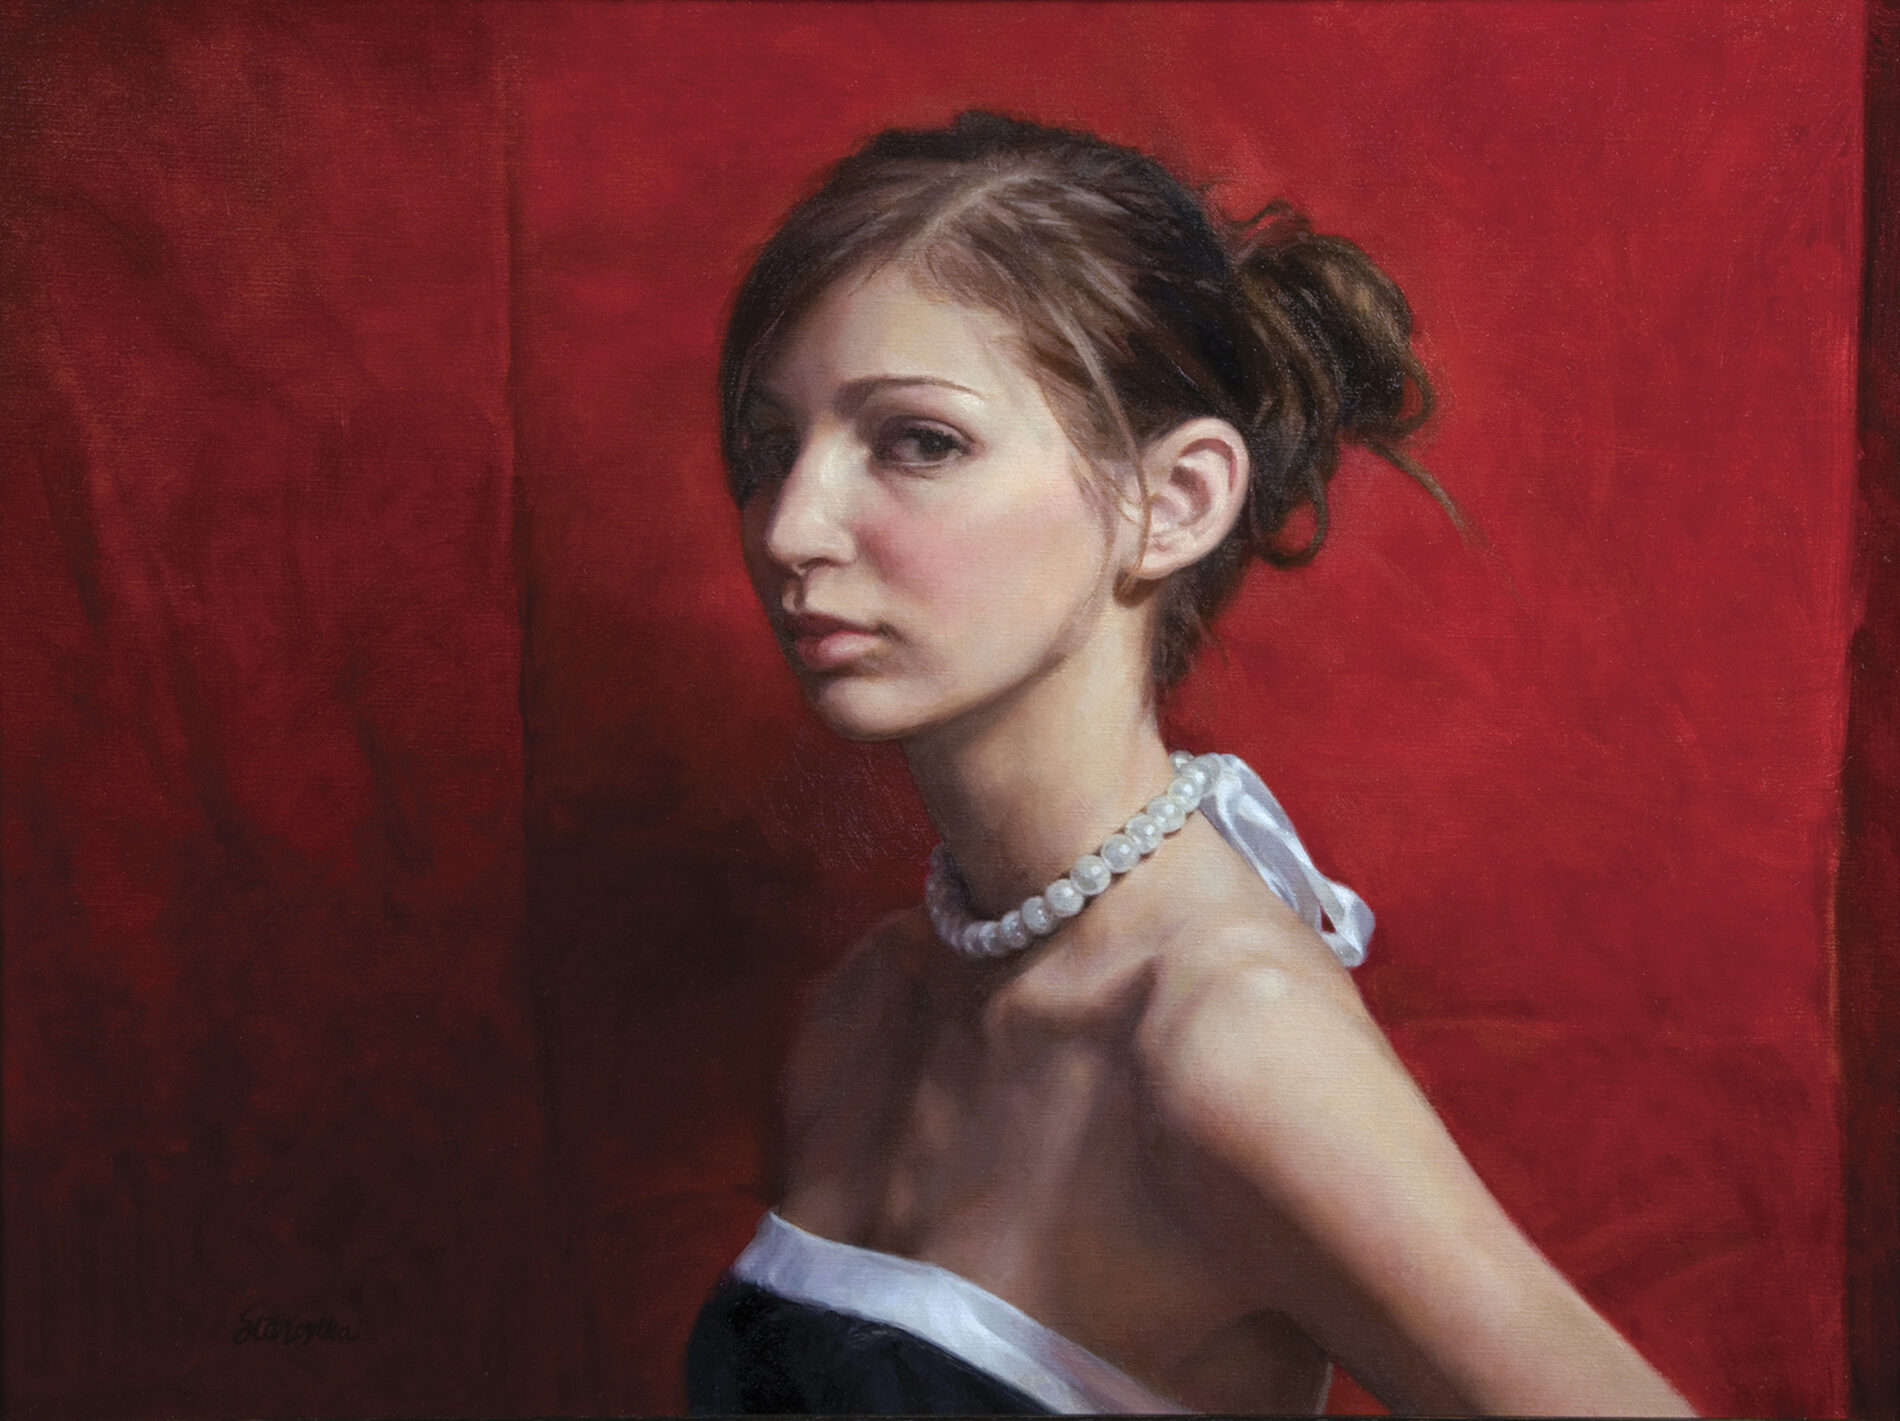 From the chest up, a young woman in a white and black dress with pearls in front of a red backdrop.